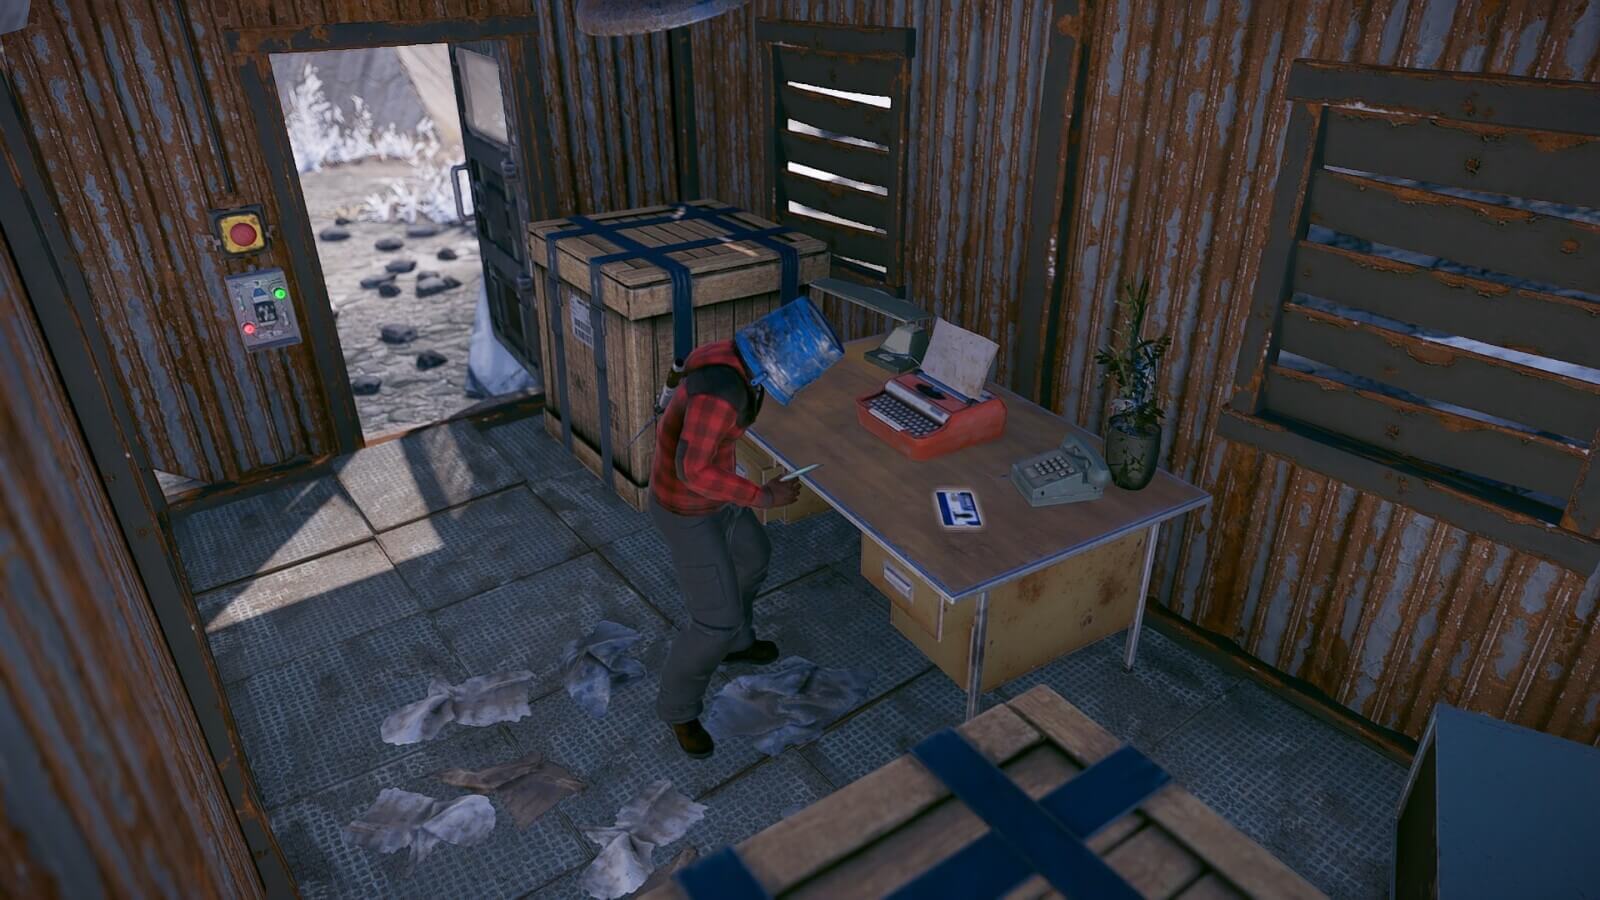 Inside of the green keycard room you'll find 2 crate spawns along with the blue keycard spawn on the desk.